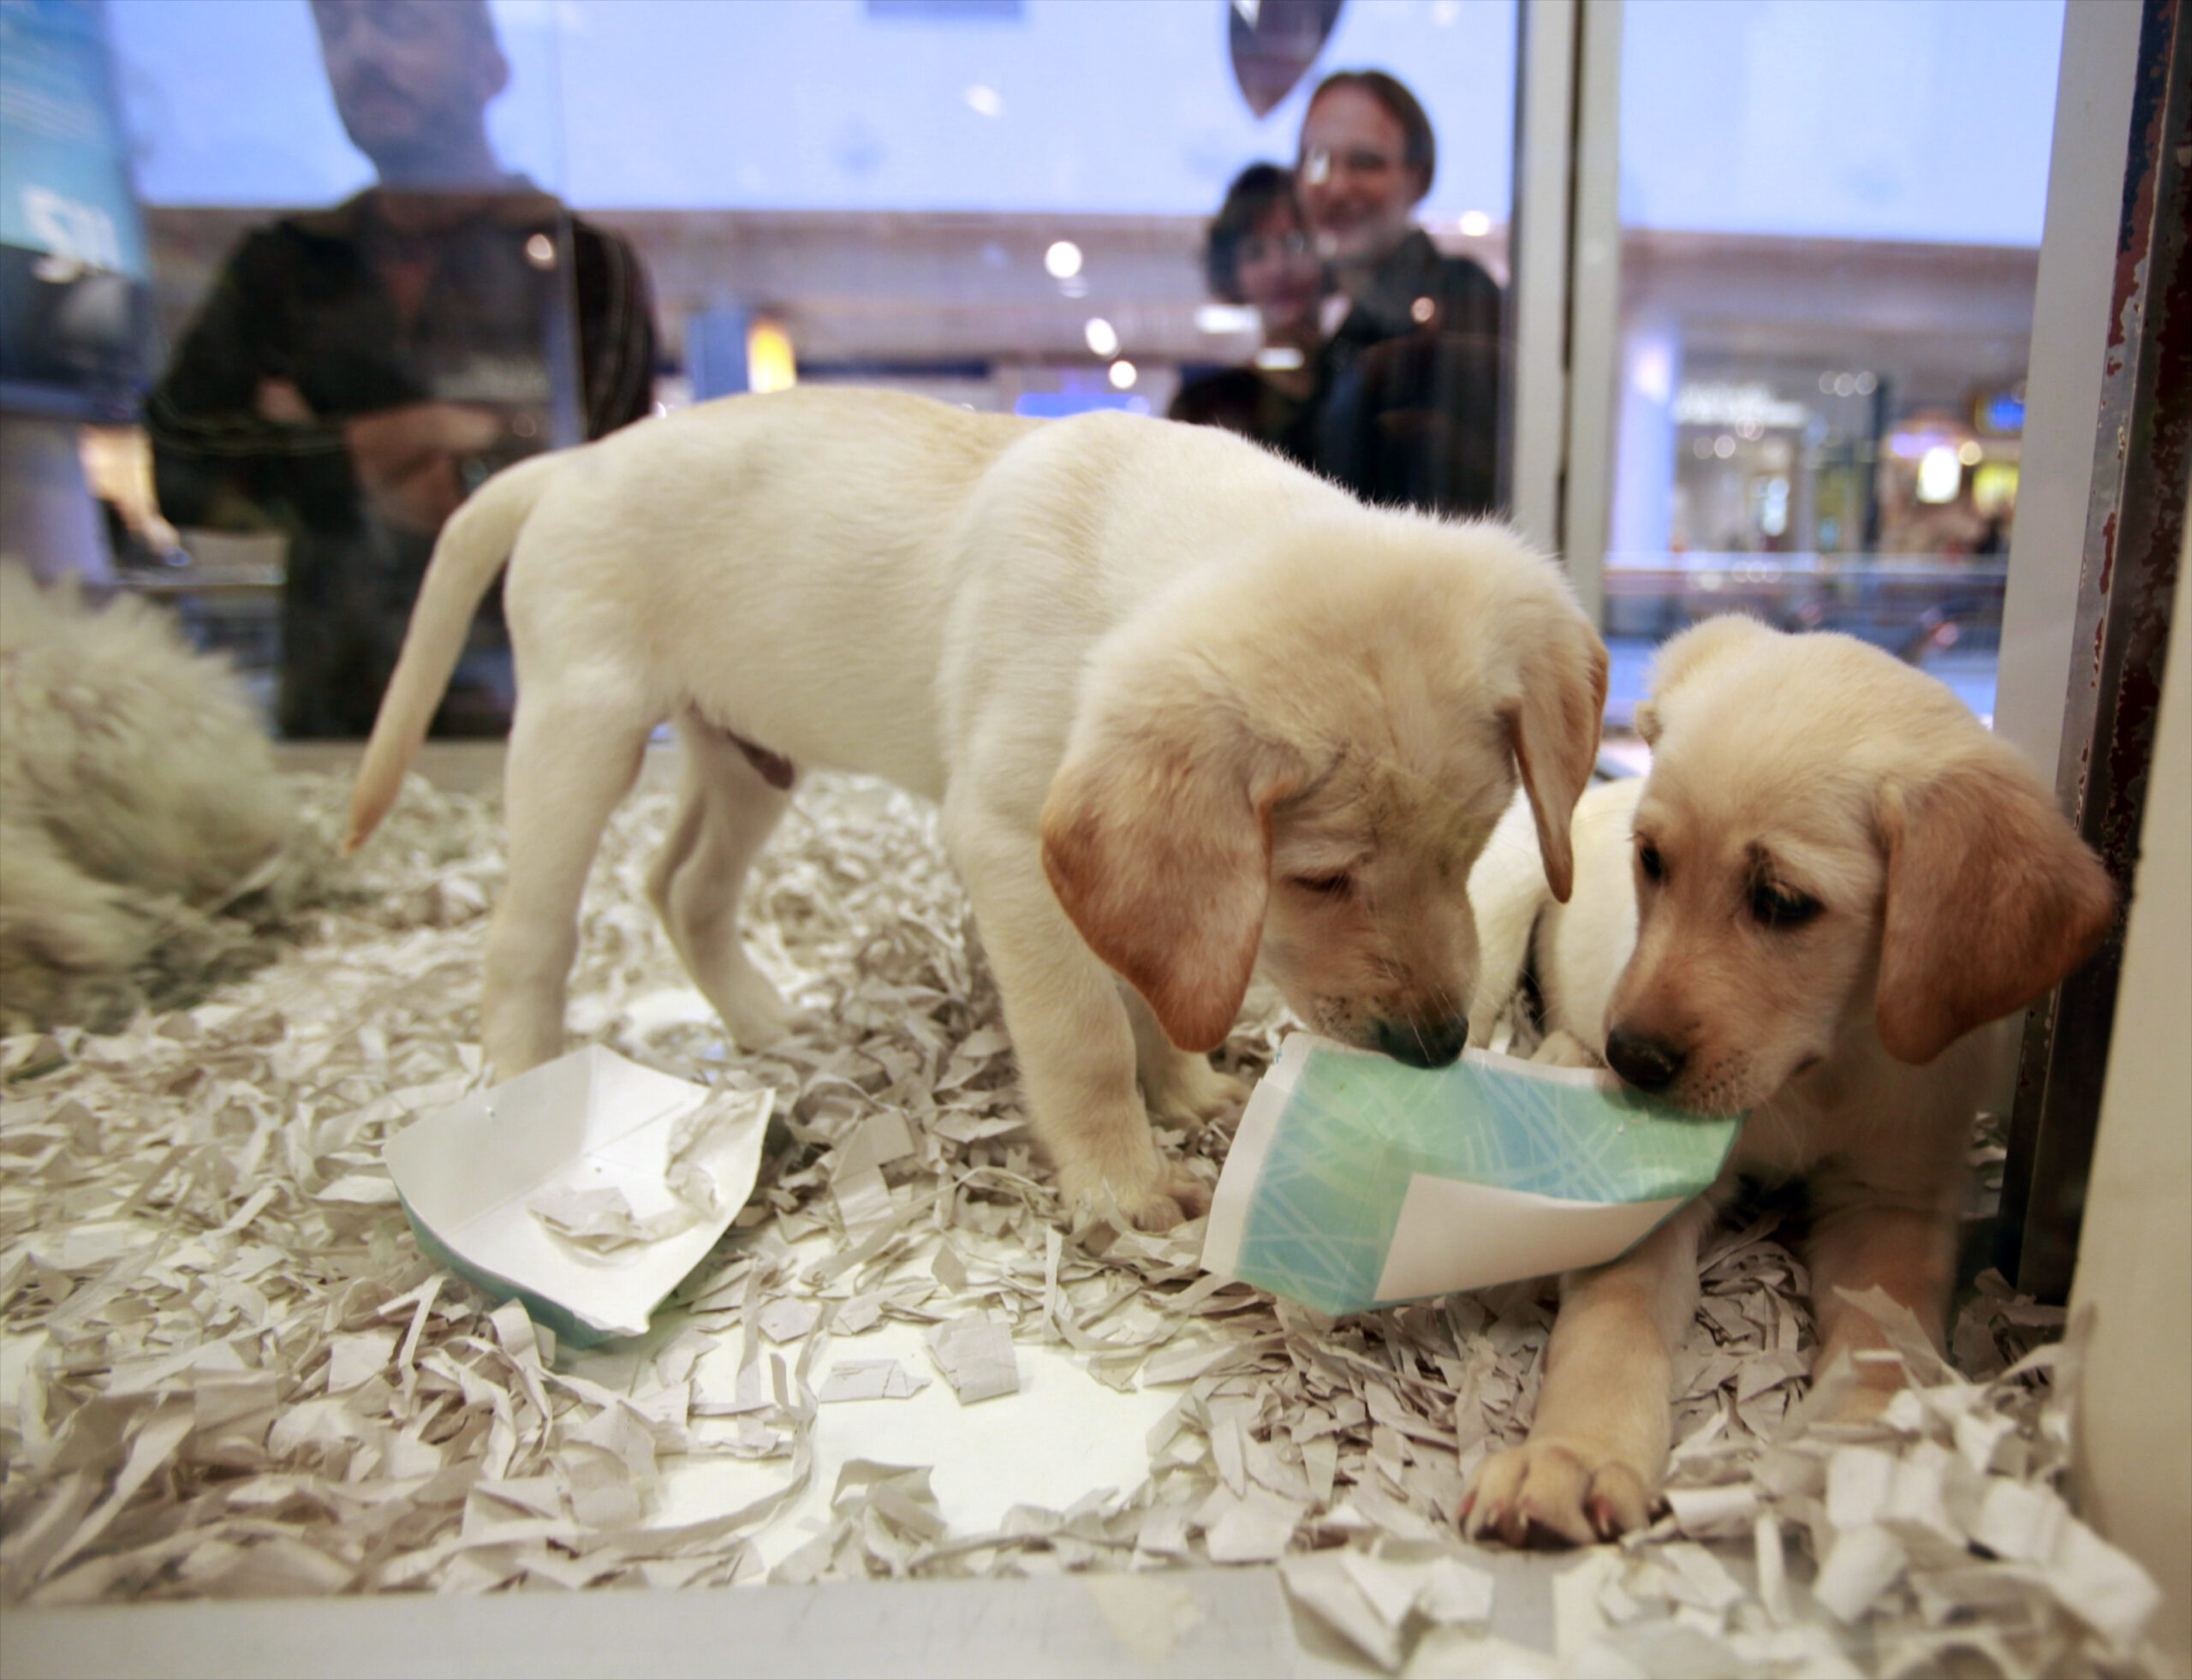 window shoppers look at a pair of Labrador puppies at a pet store